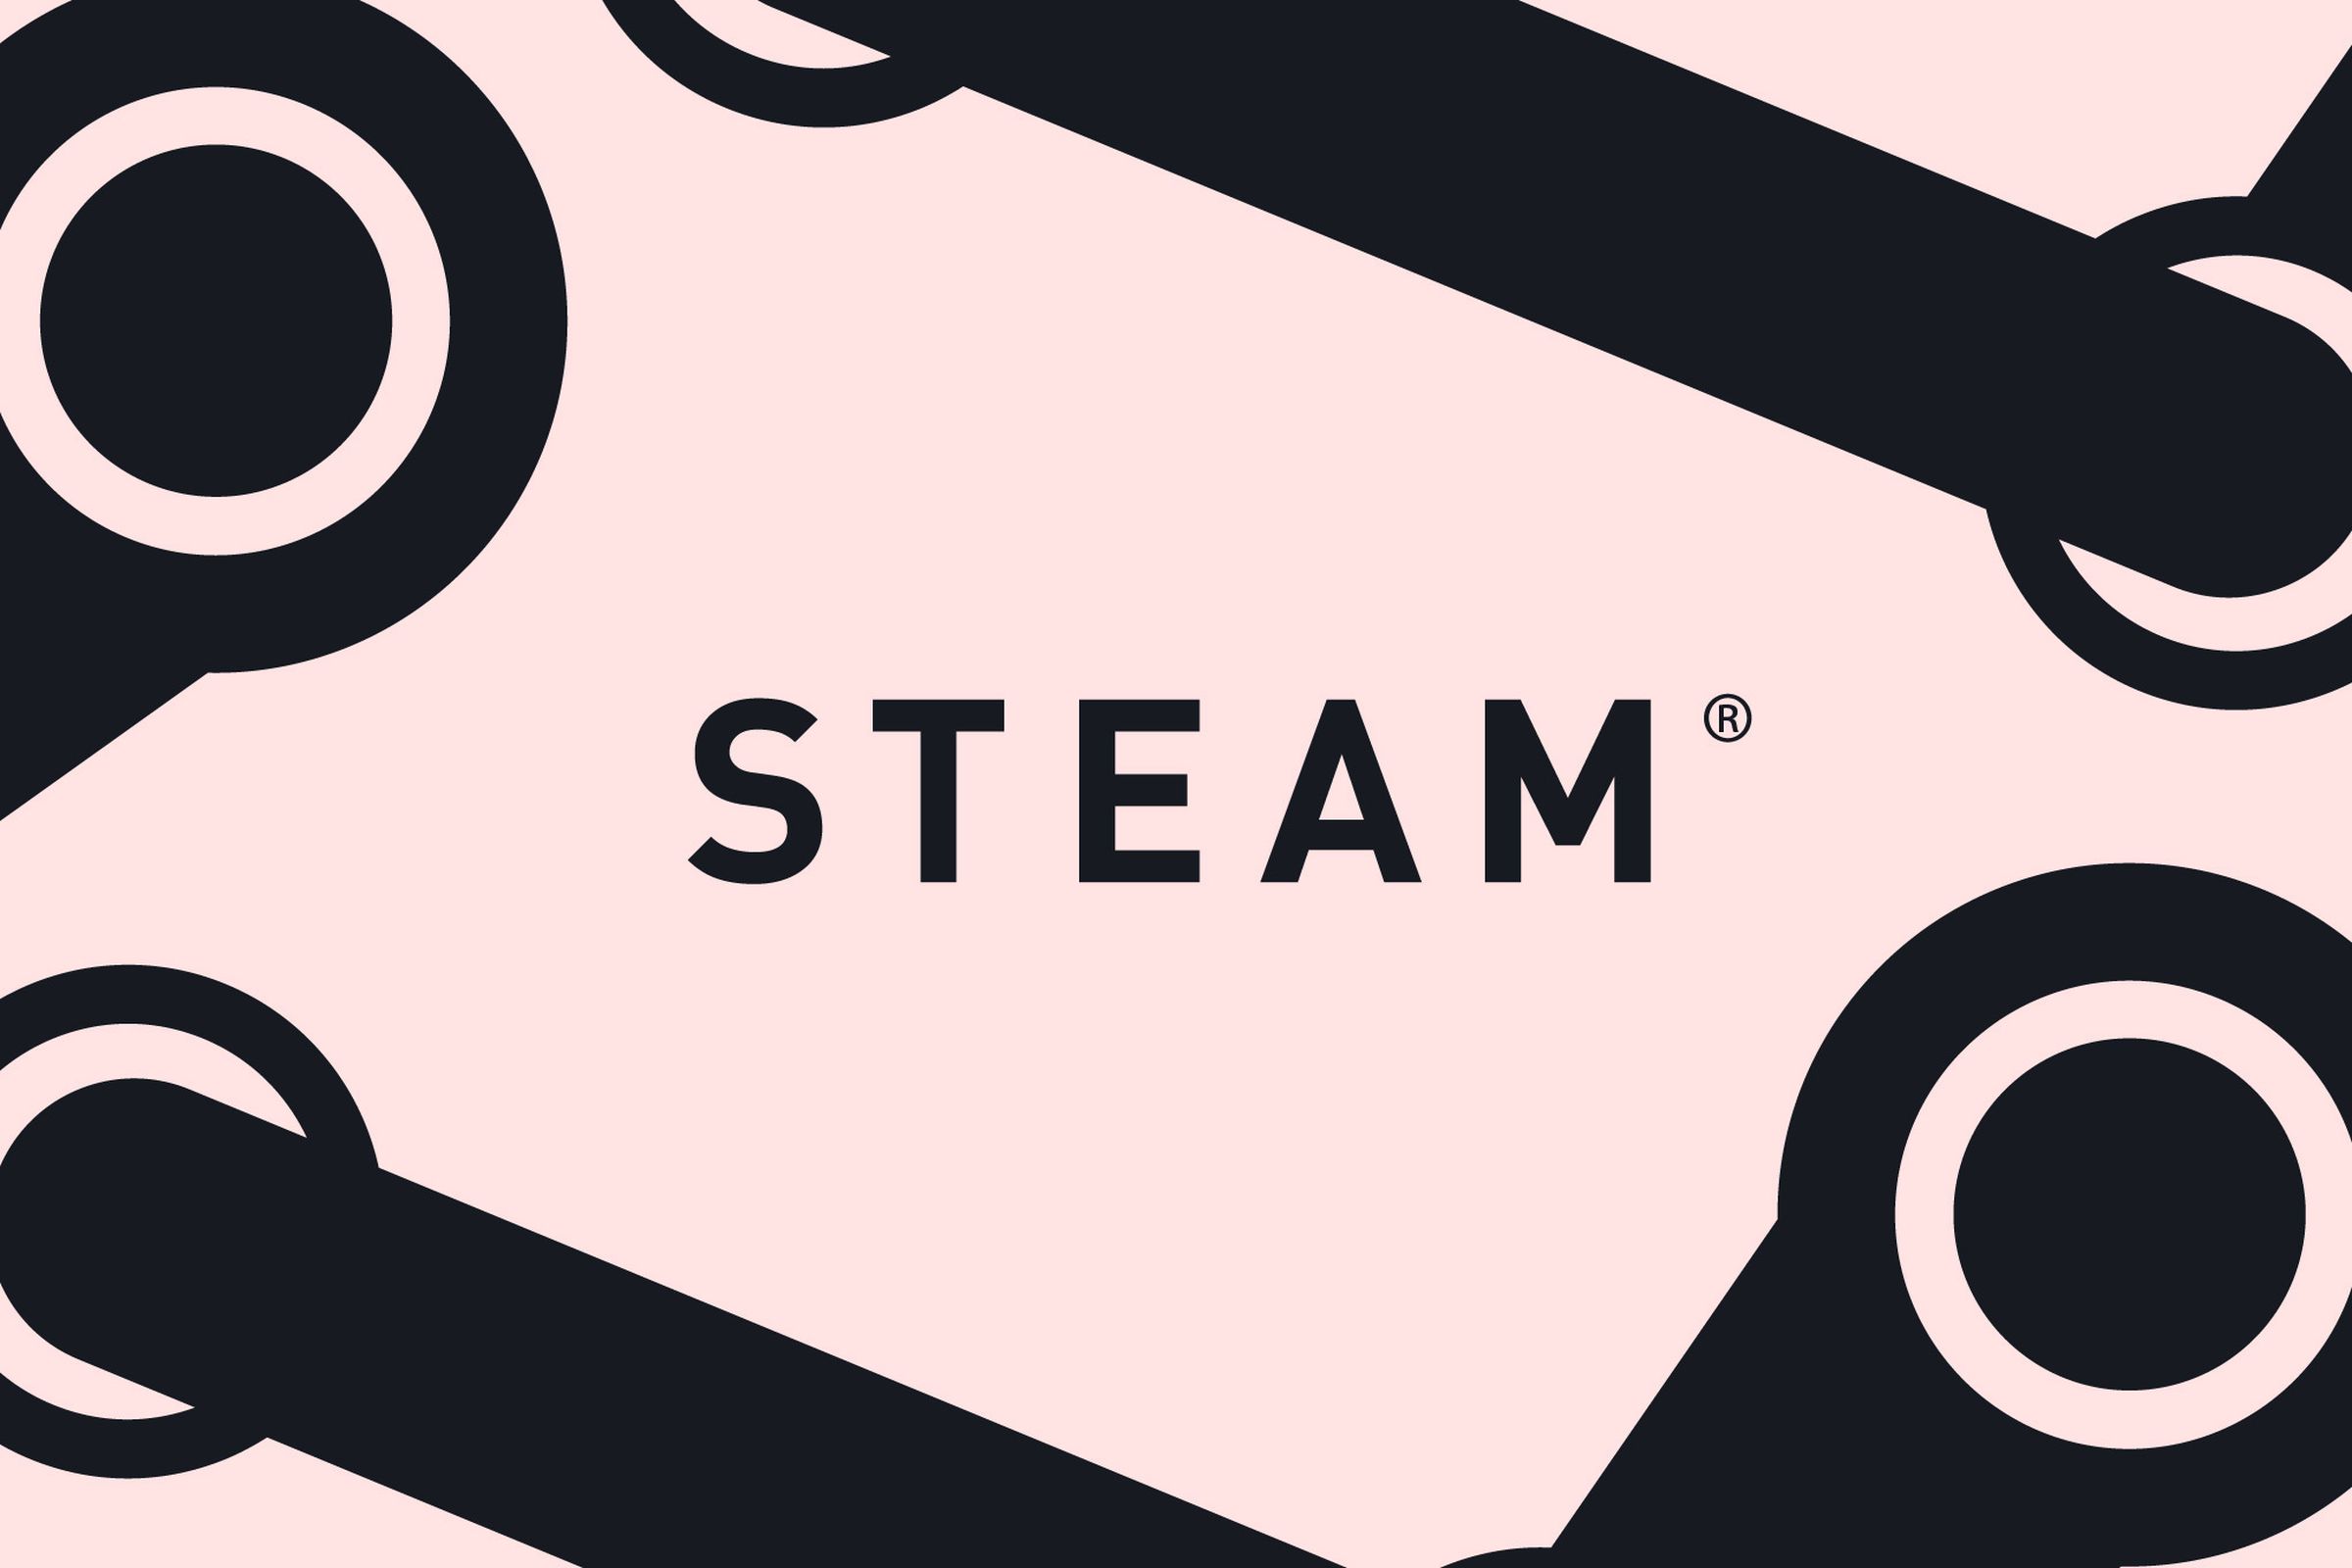 The Steam logo on a pink background, surrounded by Valve logos.